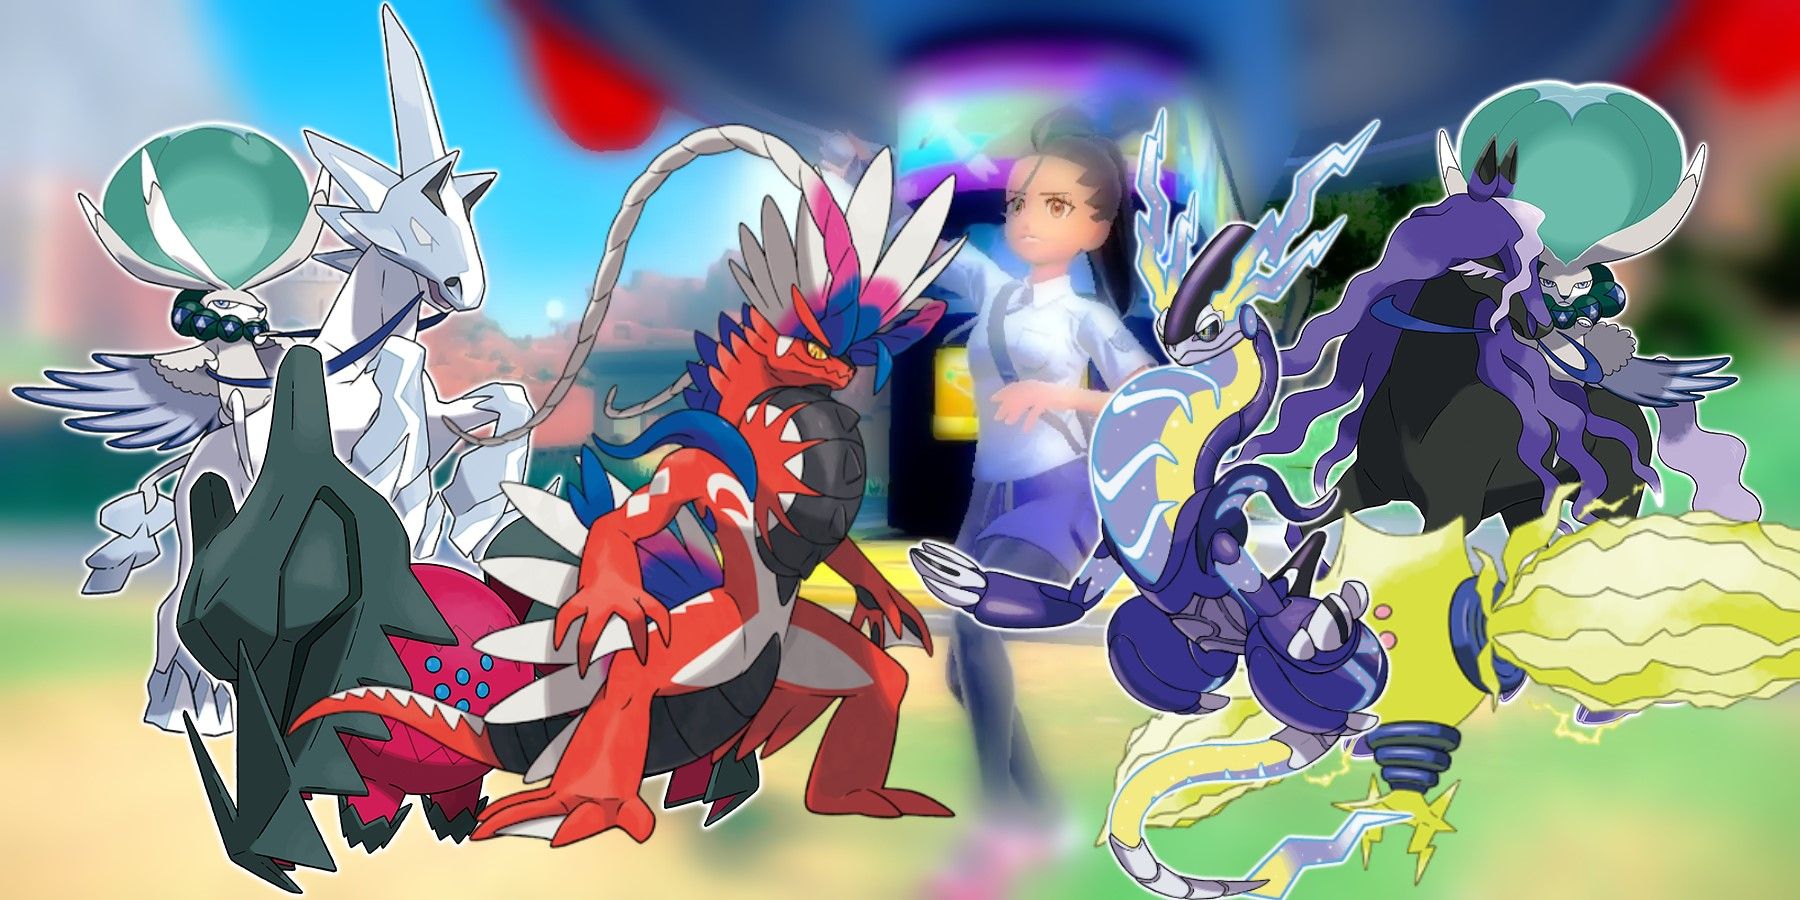 Pokemon Scarlet and Violet Should Remedy a Major Issue With Gen 8's DLC